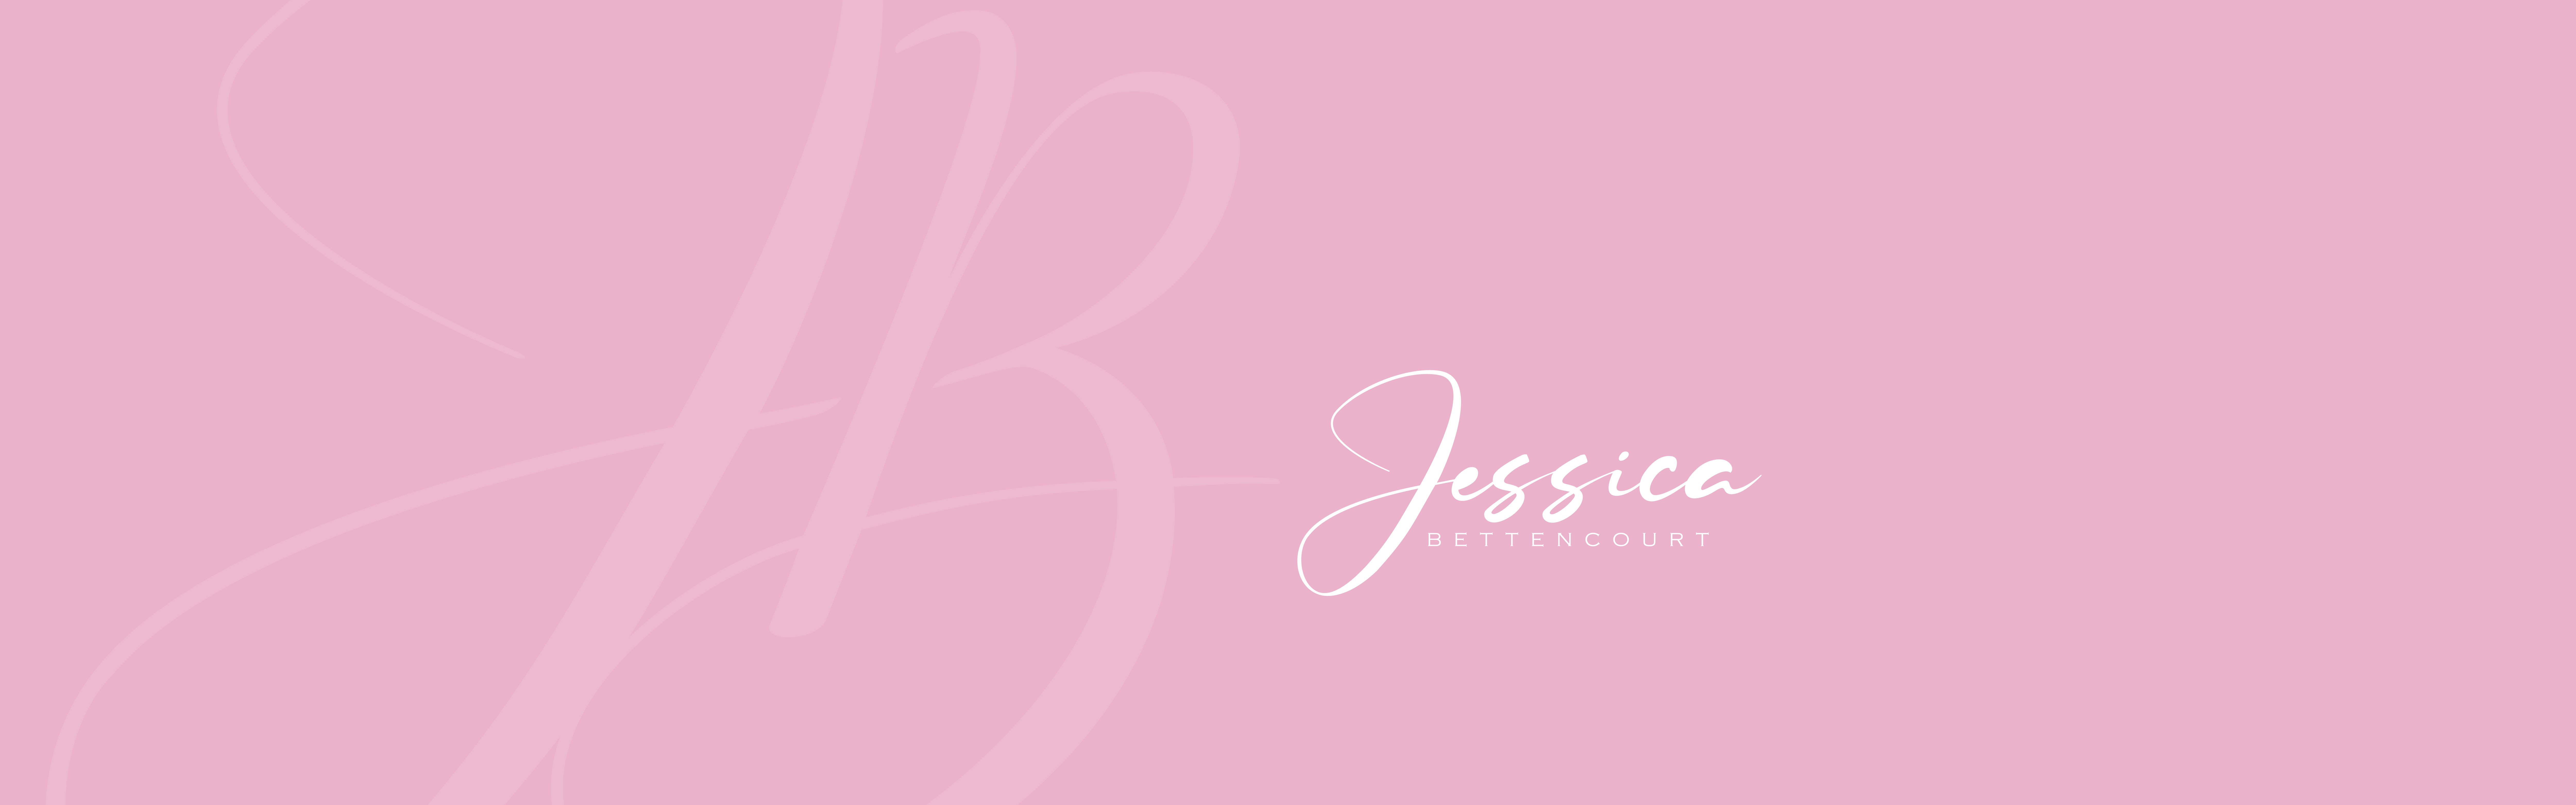 A minimalist pink background with a decorative white ribbon design on the left and the name 'Jessica Bettencourt' written in cursive on the right side.